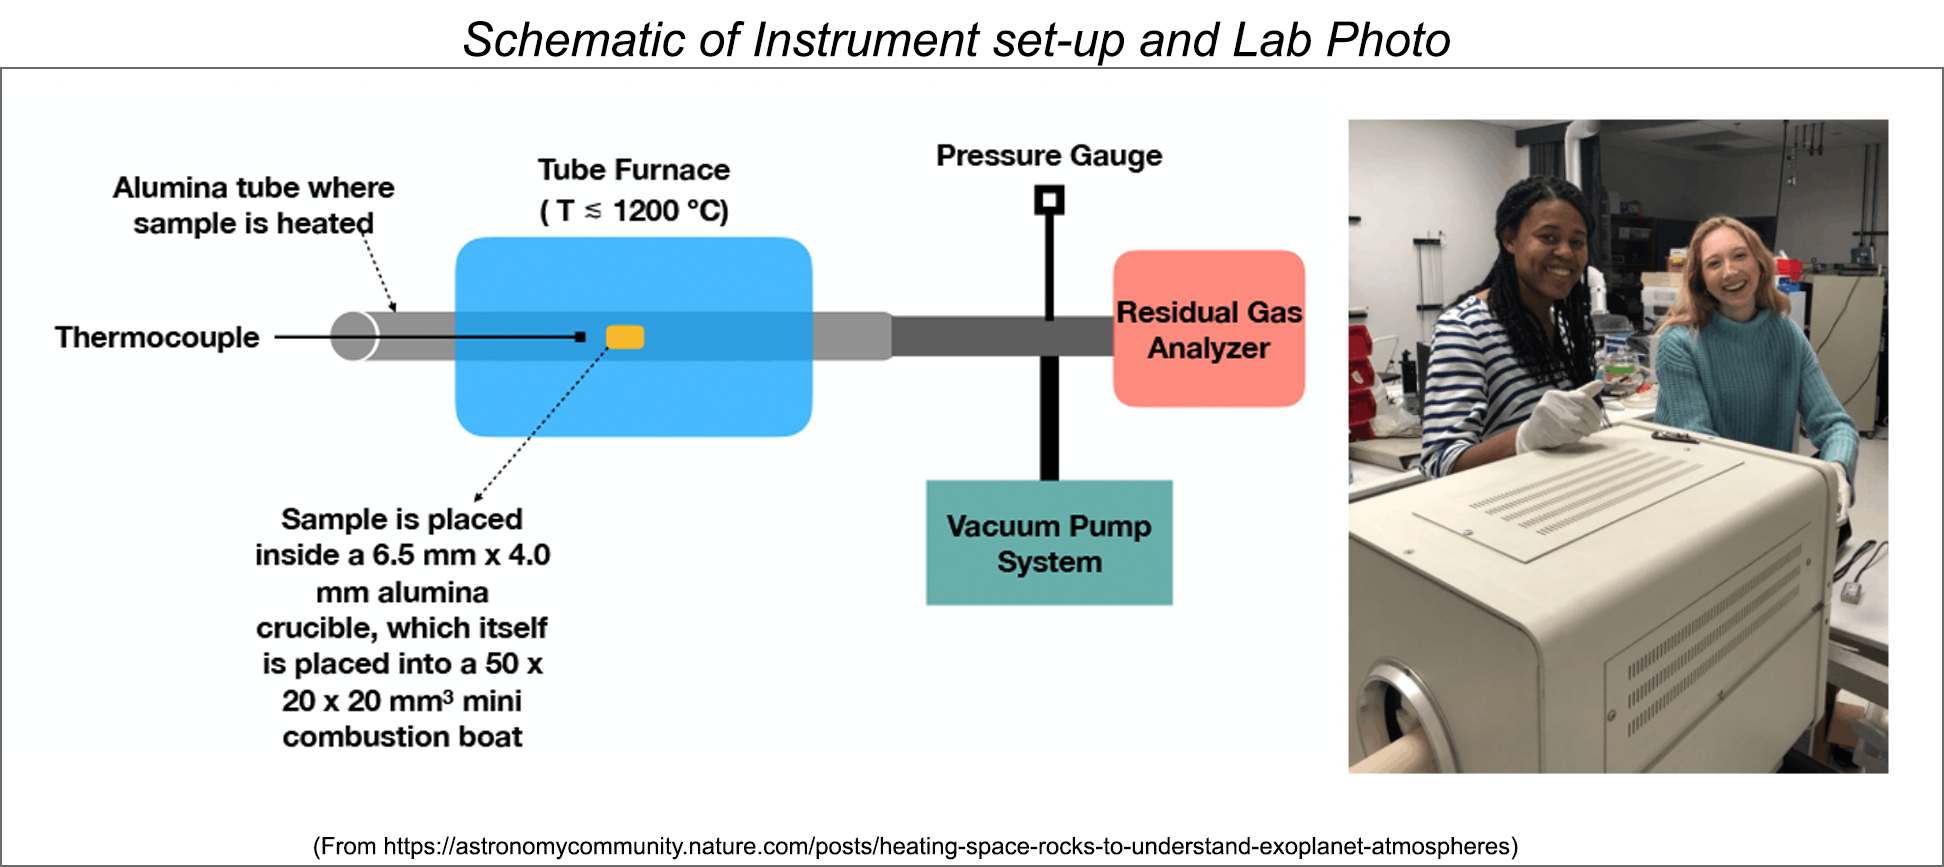 Schematic of the instrument set-up used for the experiments and a photo of researchers Telus (left) and Thompson (right).